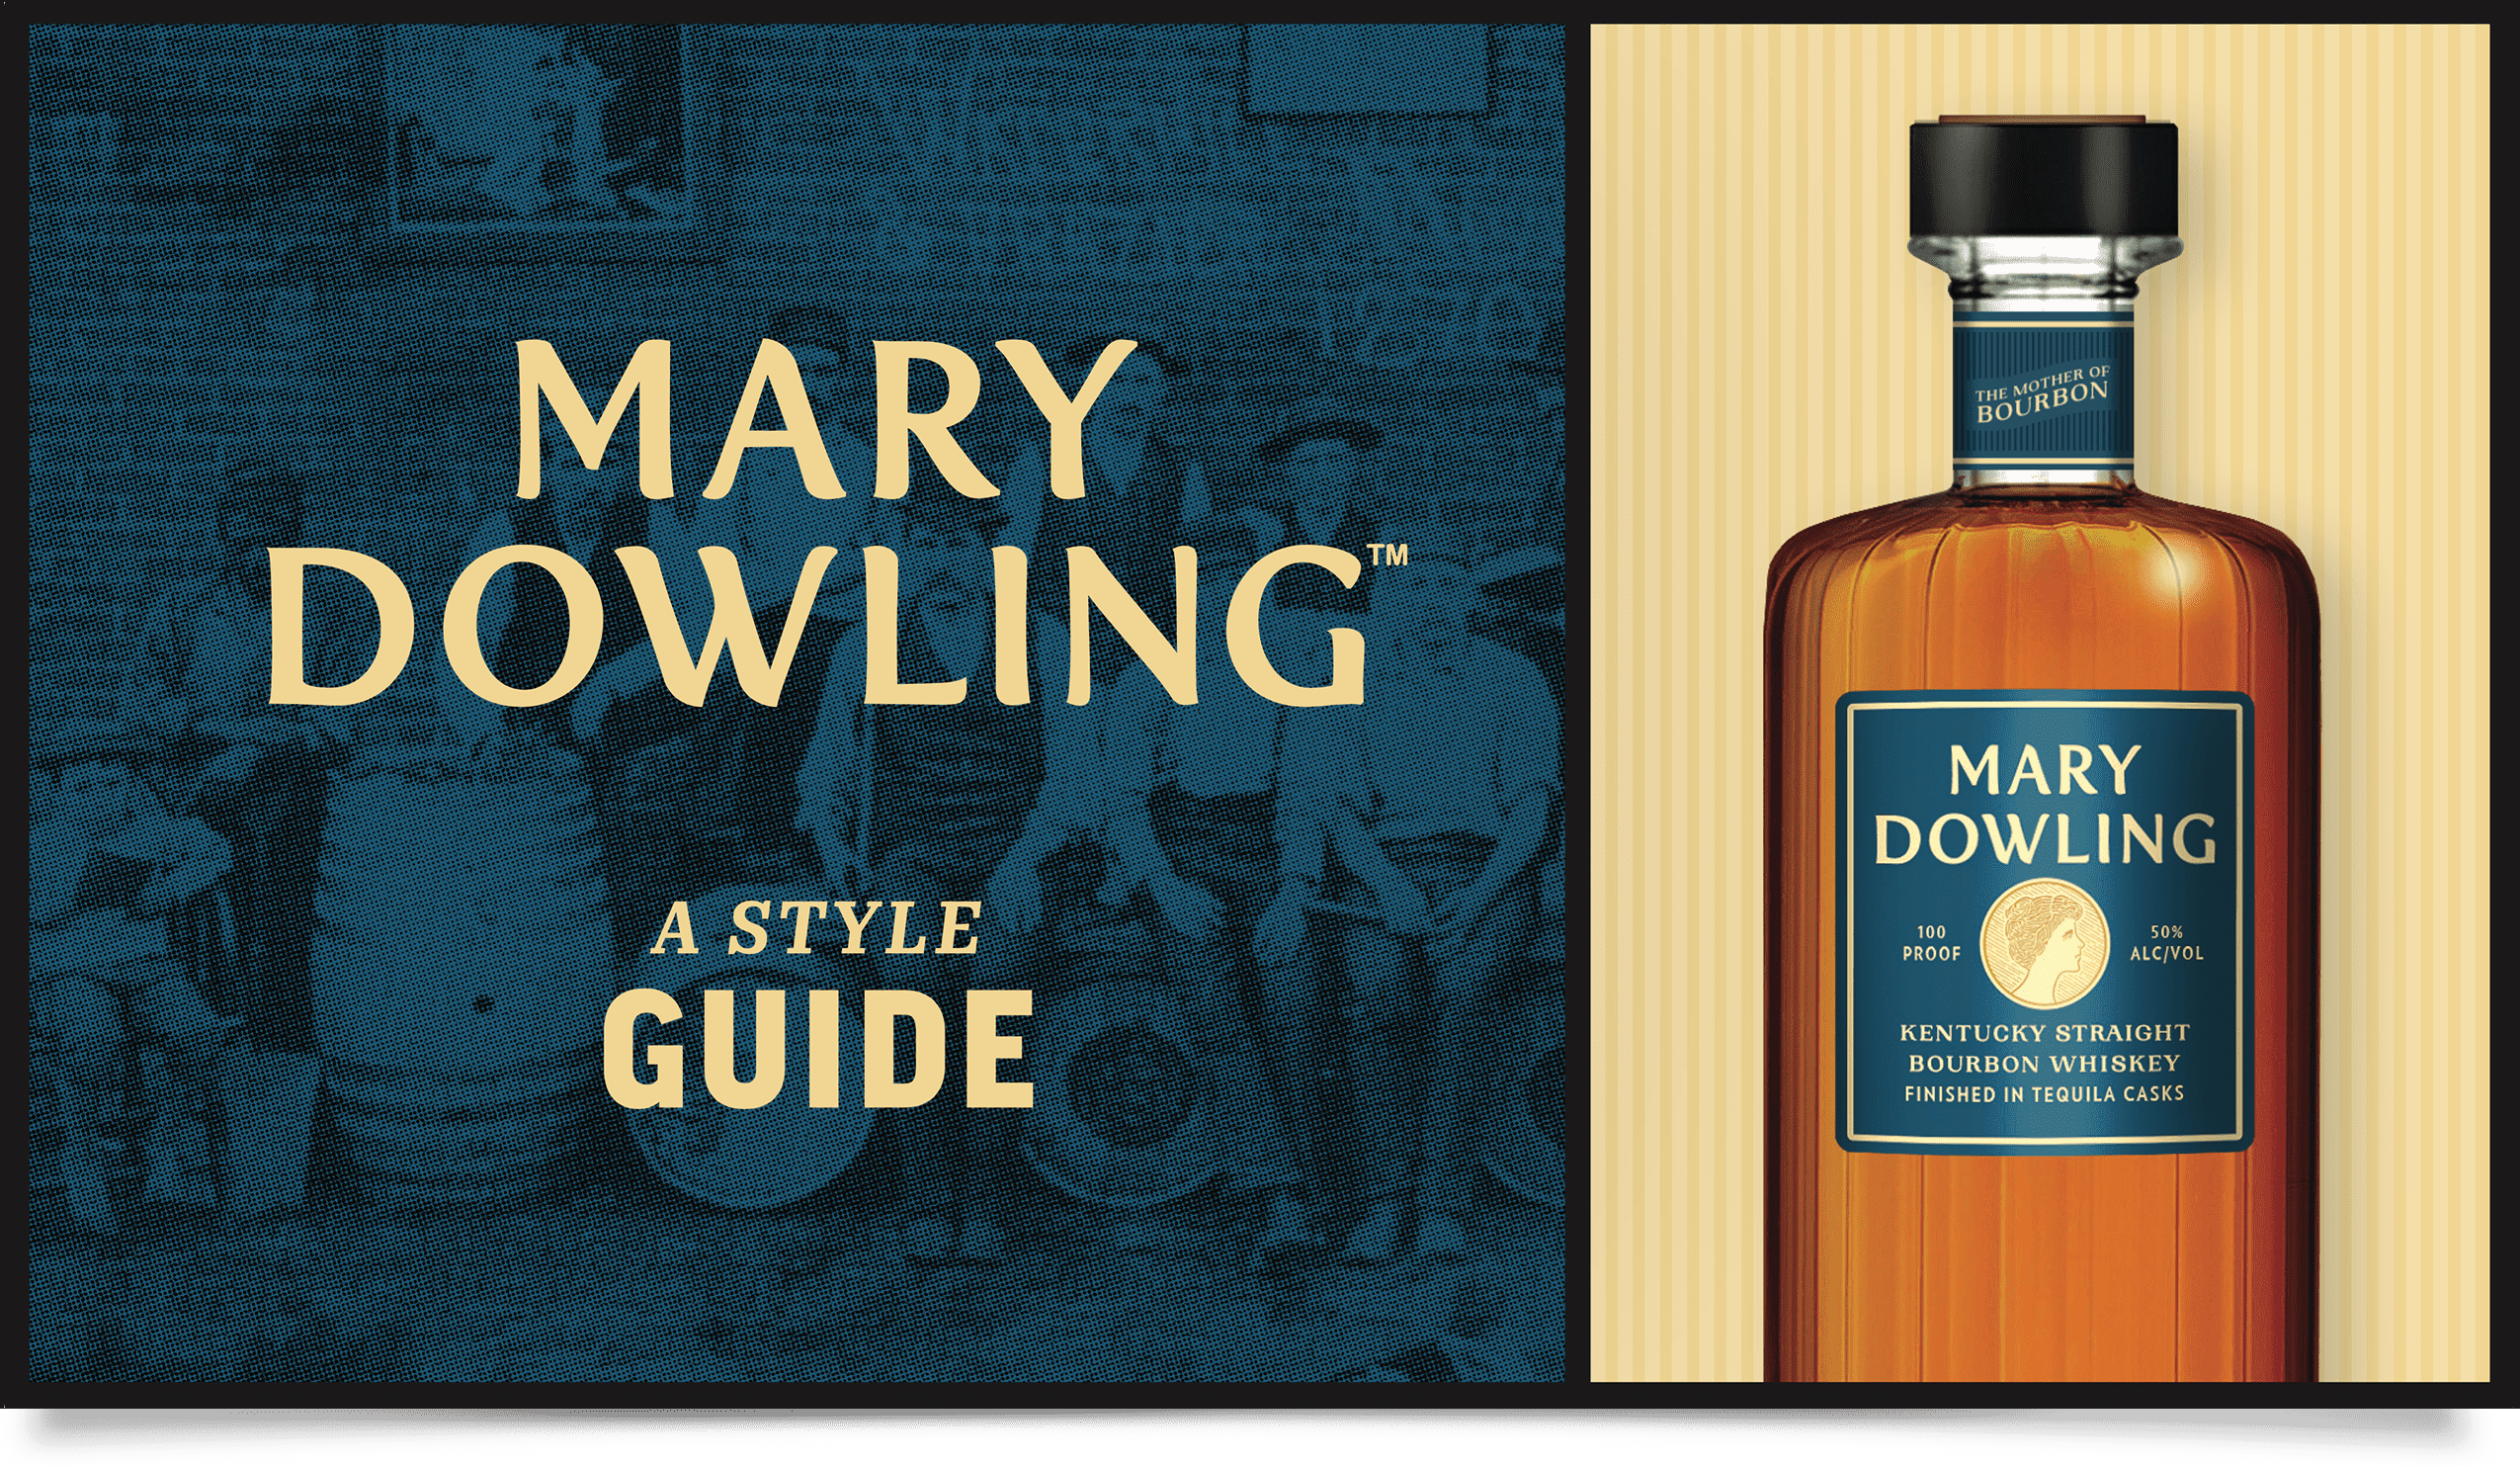 Mary Dowling style guide